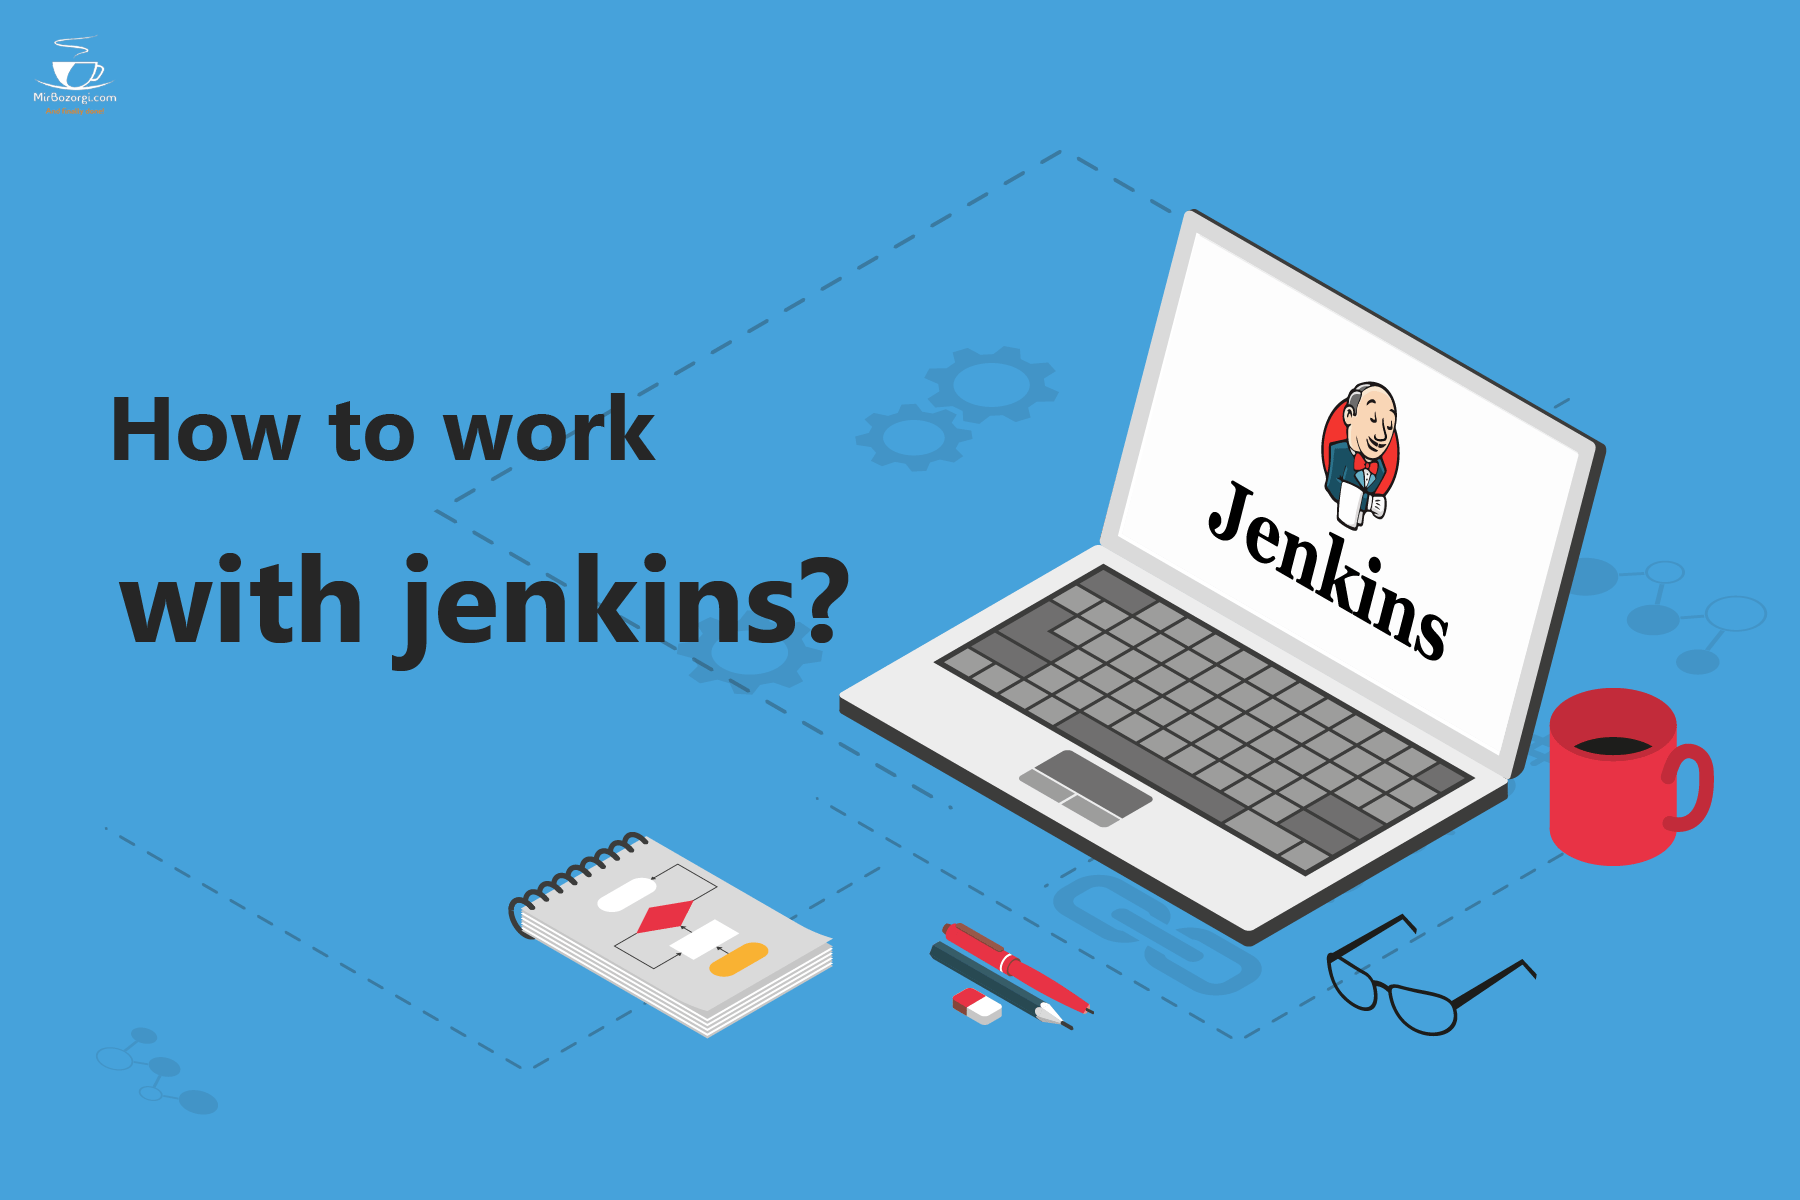 How to work with Jenkins